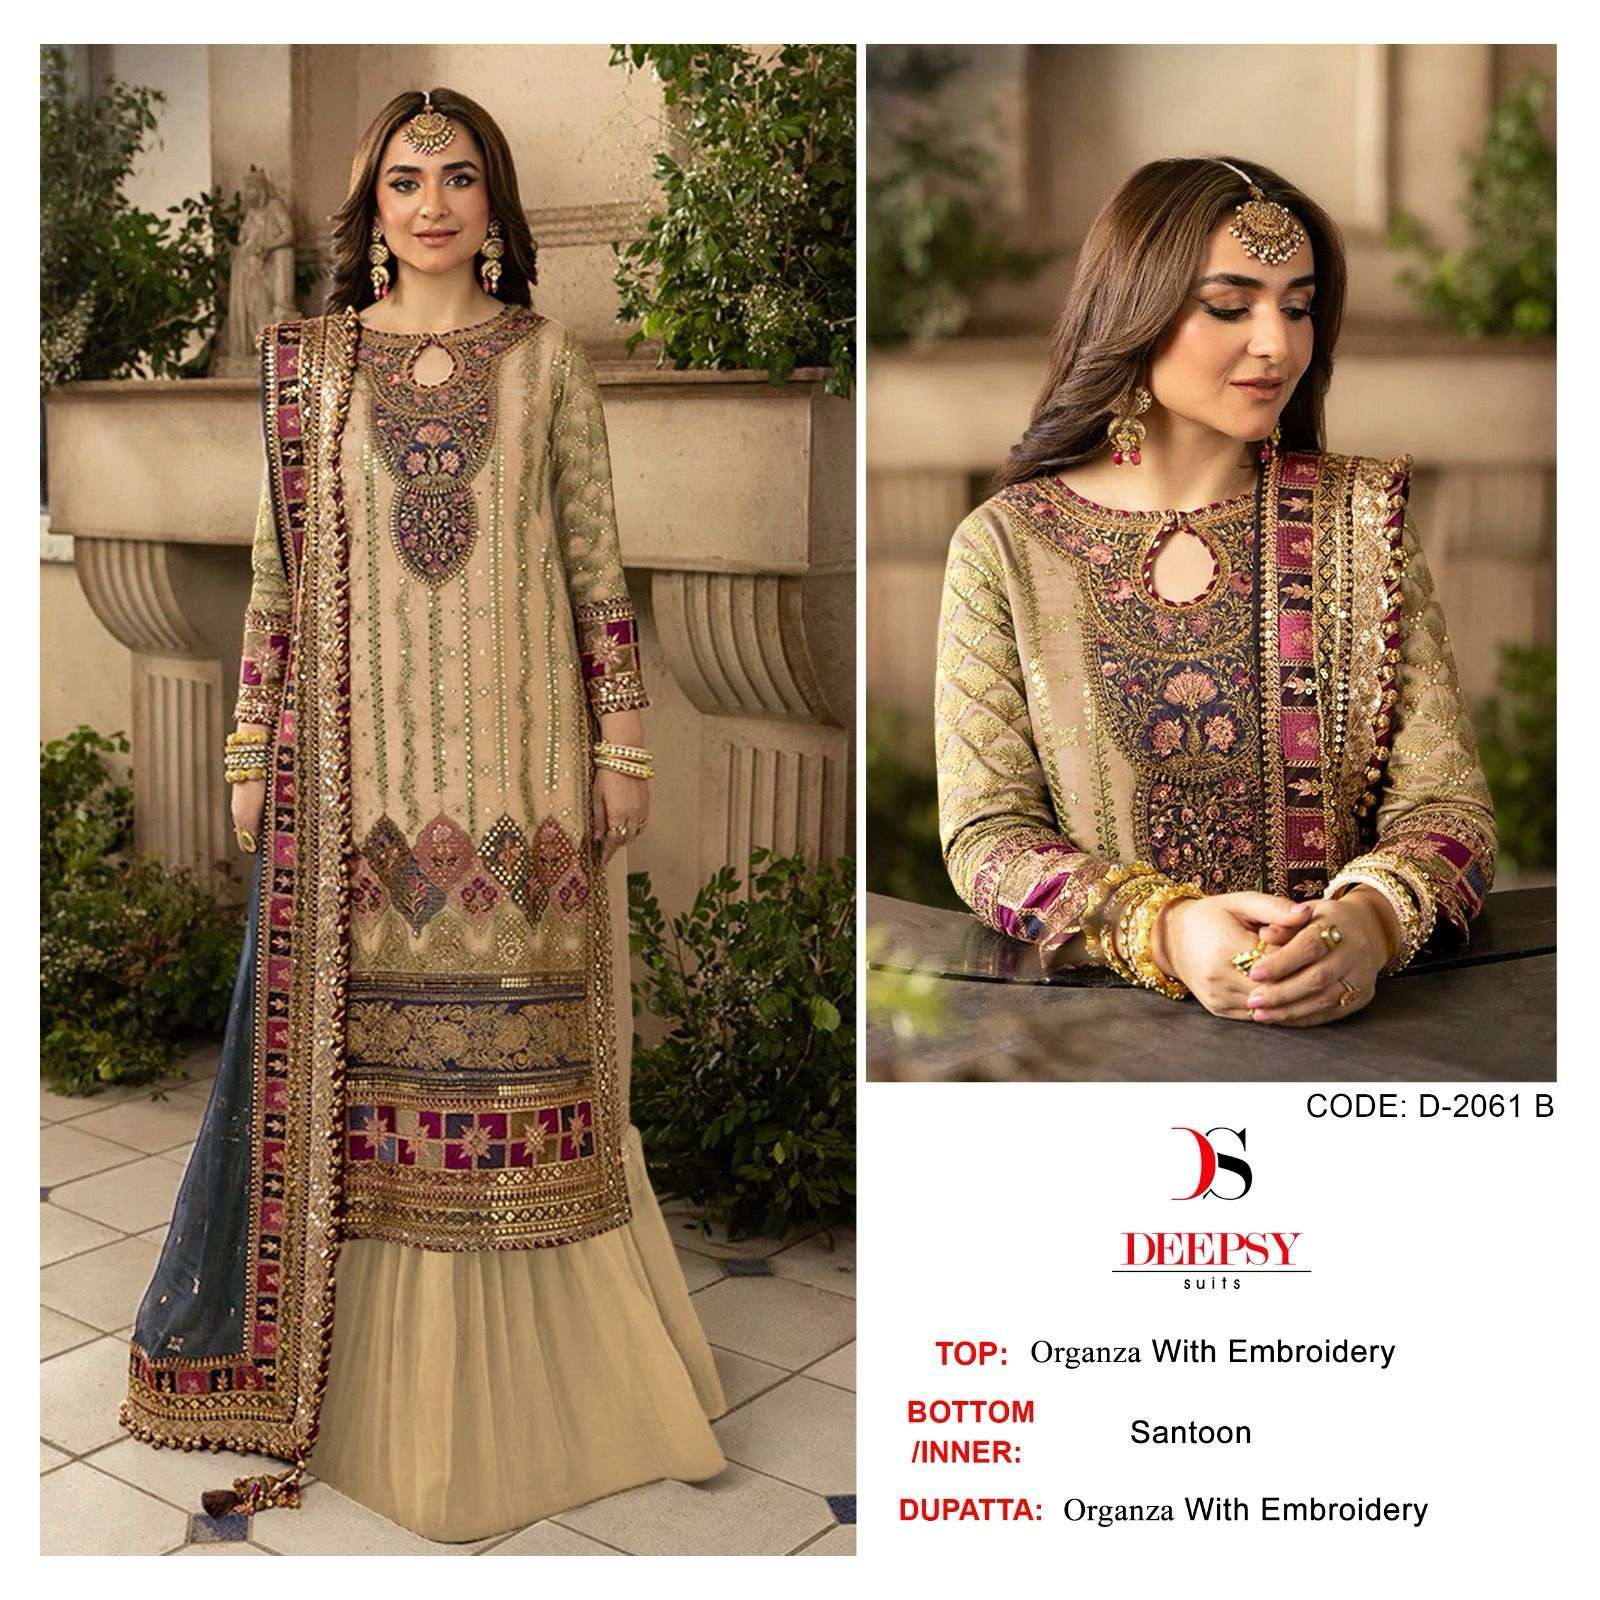 Deepsy suits D 2061 Organza With Embroidery work Pakistani s...